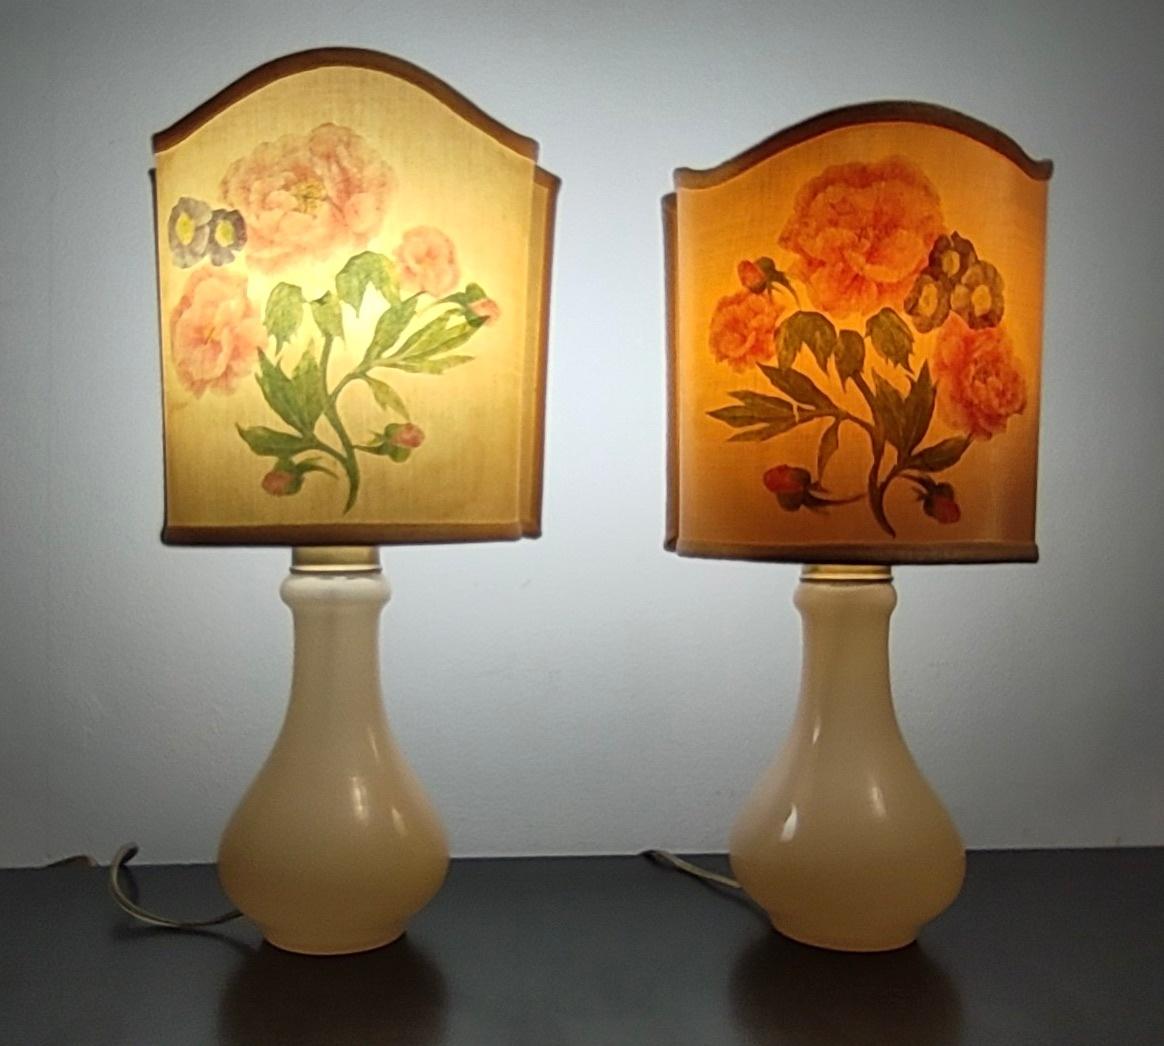 Made in Italy, 1960s
These table lamps are made in Murano glass with brass elements. 
They feature a flower design on the fabric lampshades.
These lamps might show slight traces of use since they're vintage, but they can be considered as in